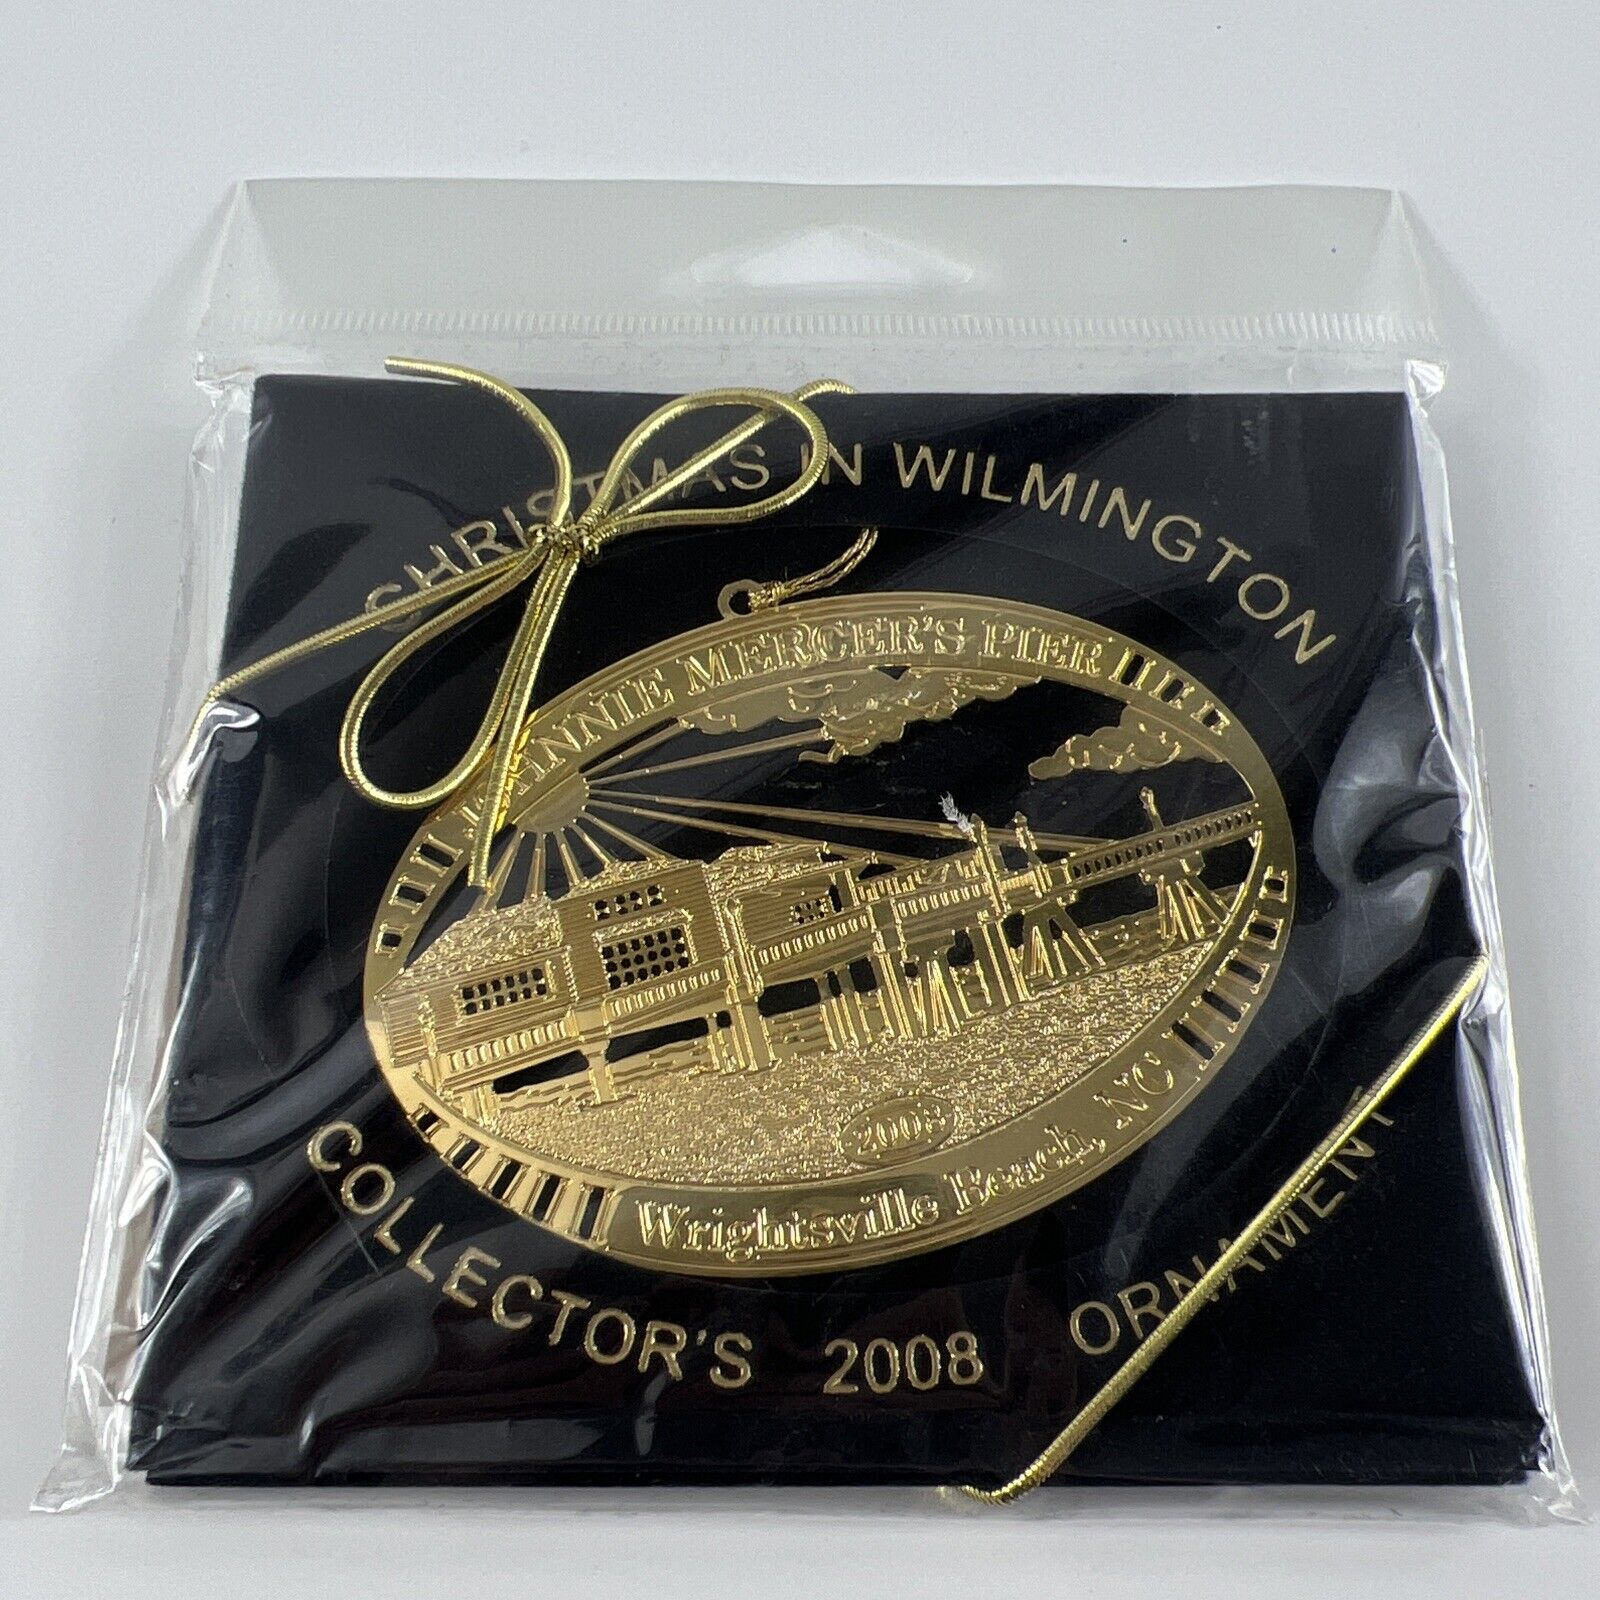 Christmas In Wilmington Collectors 2008 Ornament, Johnnie Mercer’s Pier With COA